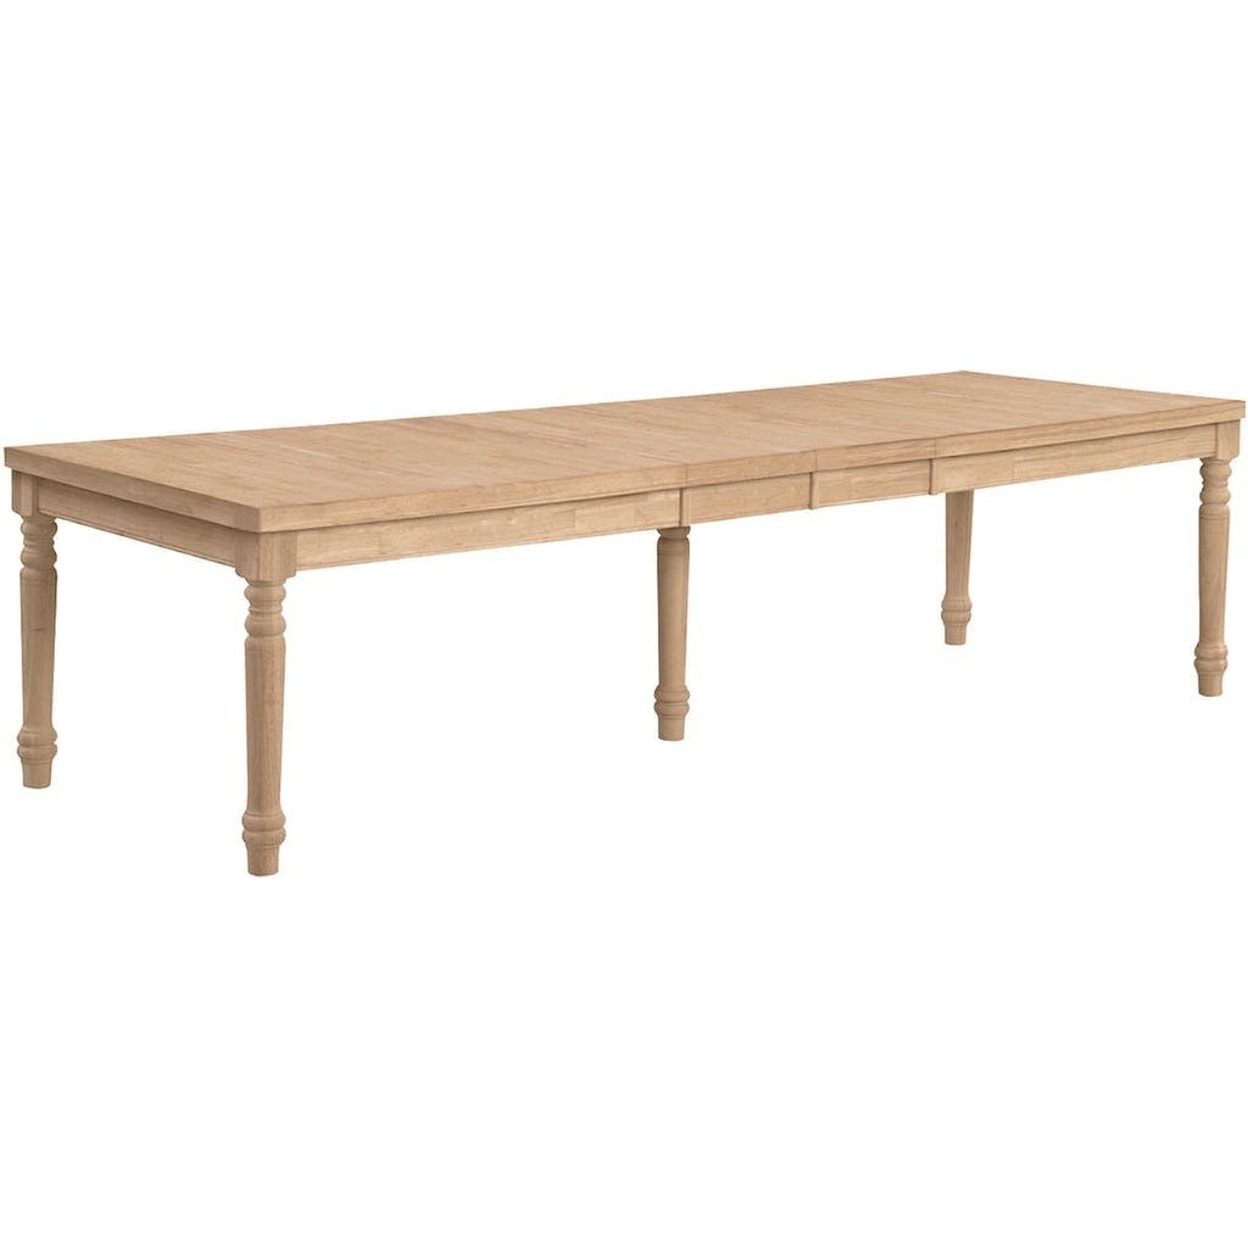 Whitewood Dining Room Pieces Large Extension Table